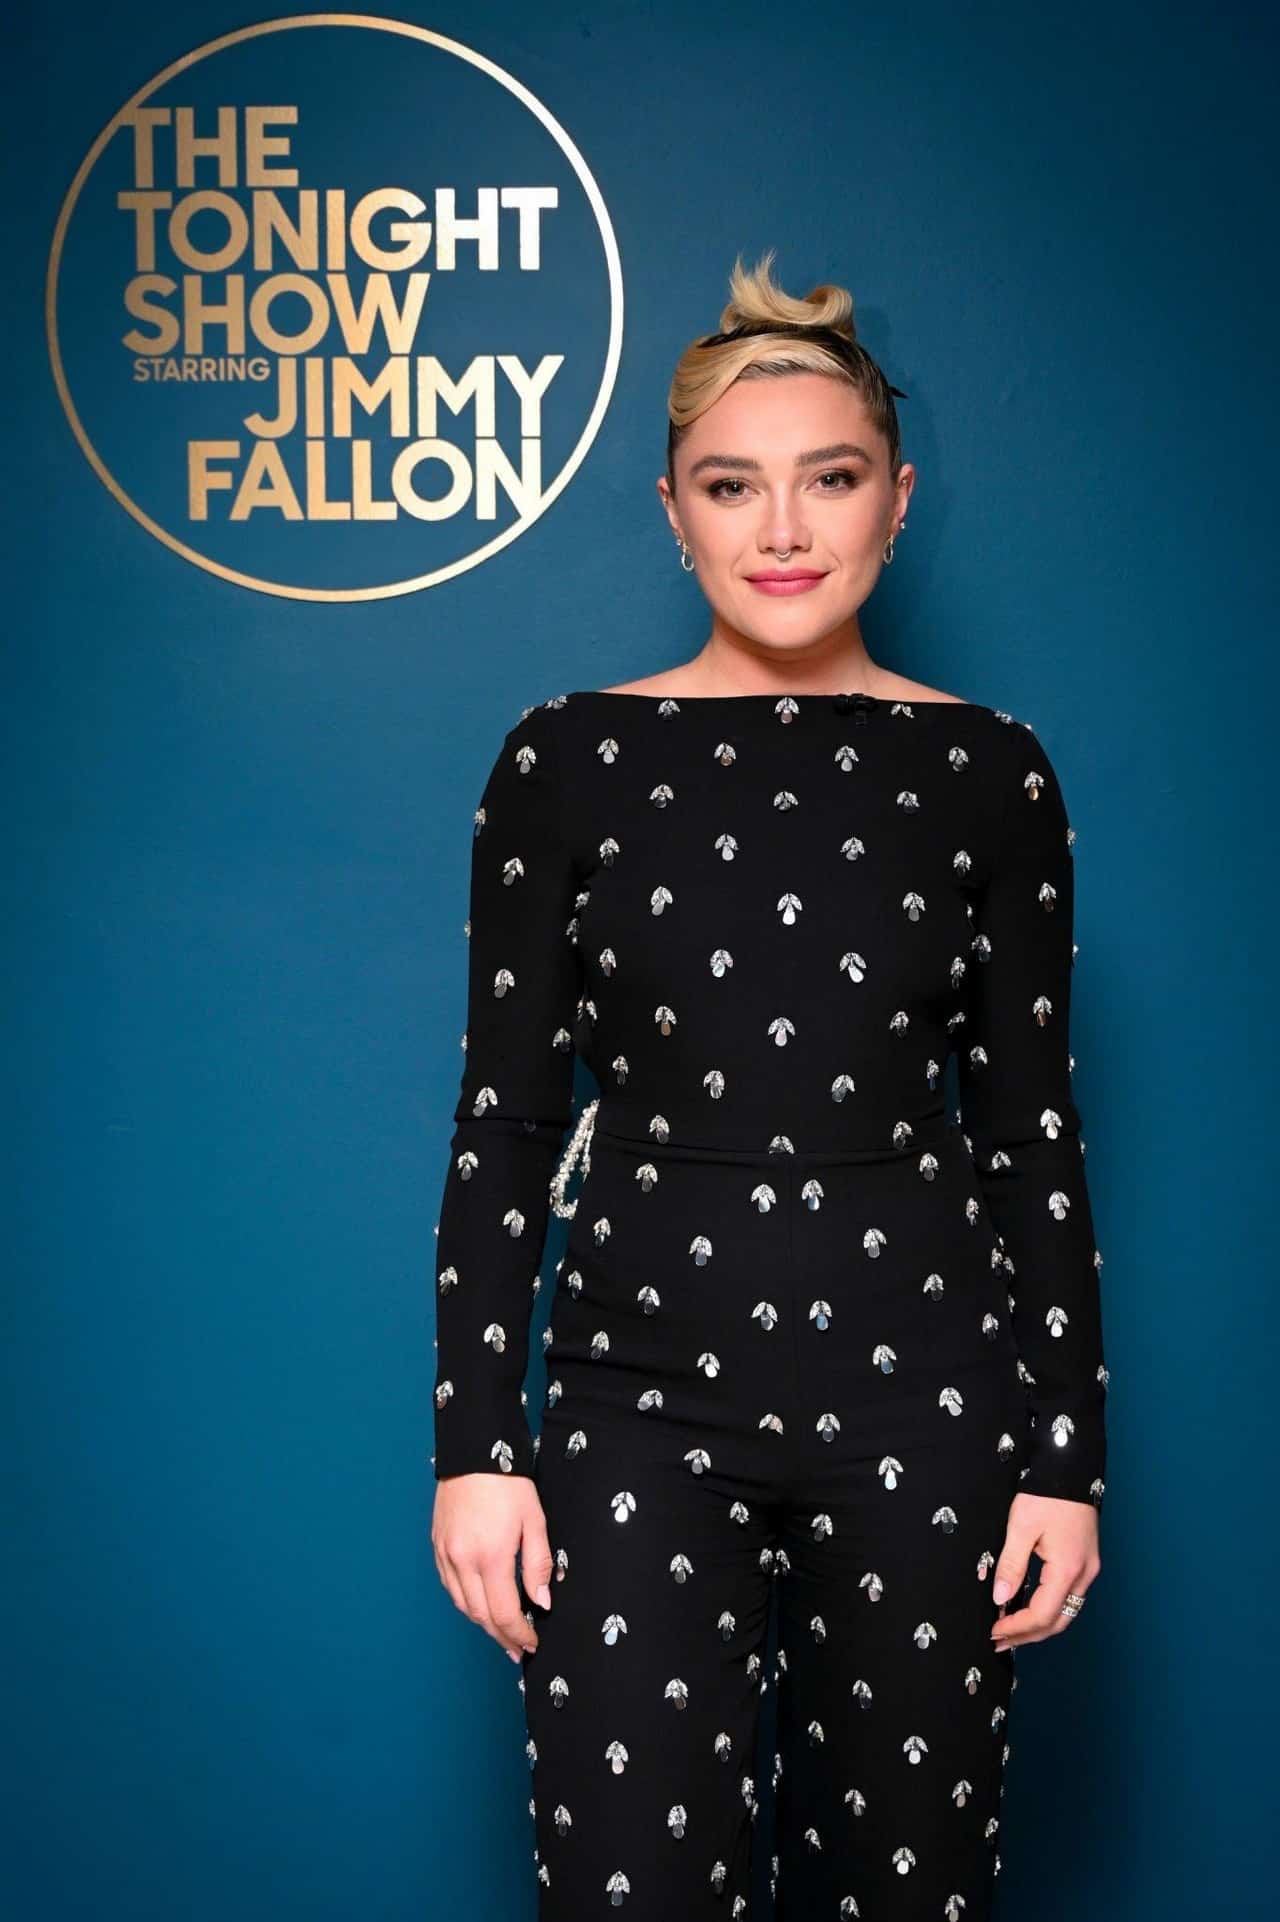 Florence Pugh Shines in Crystal-Embellished Jumpsuit on "The Tonight Show"